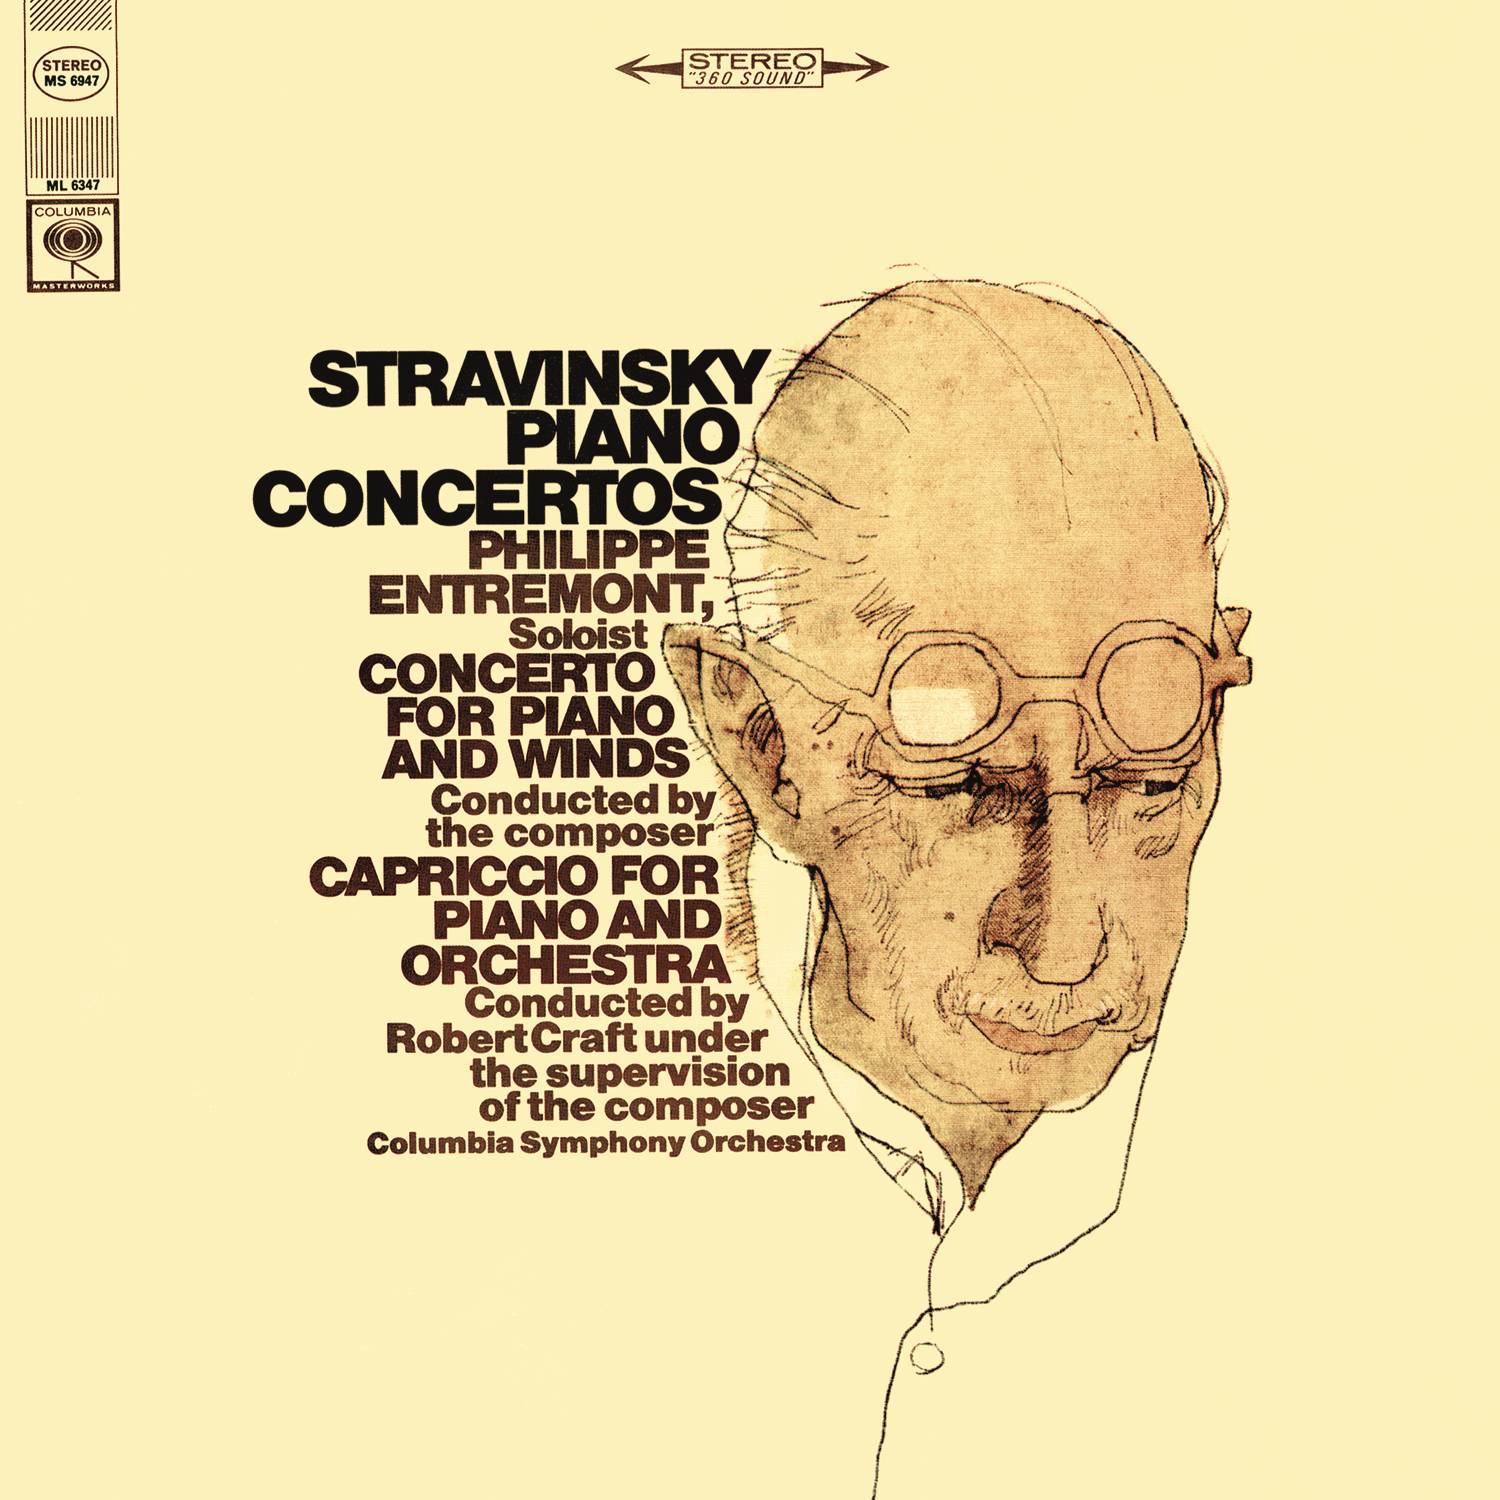 Concerto for Piano and Wind Instruments: I. Largo - Allegro (Revised 1950 version)